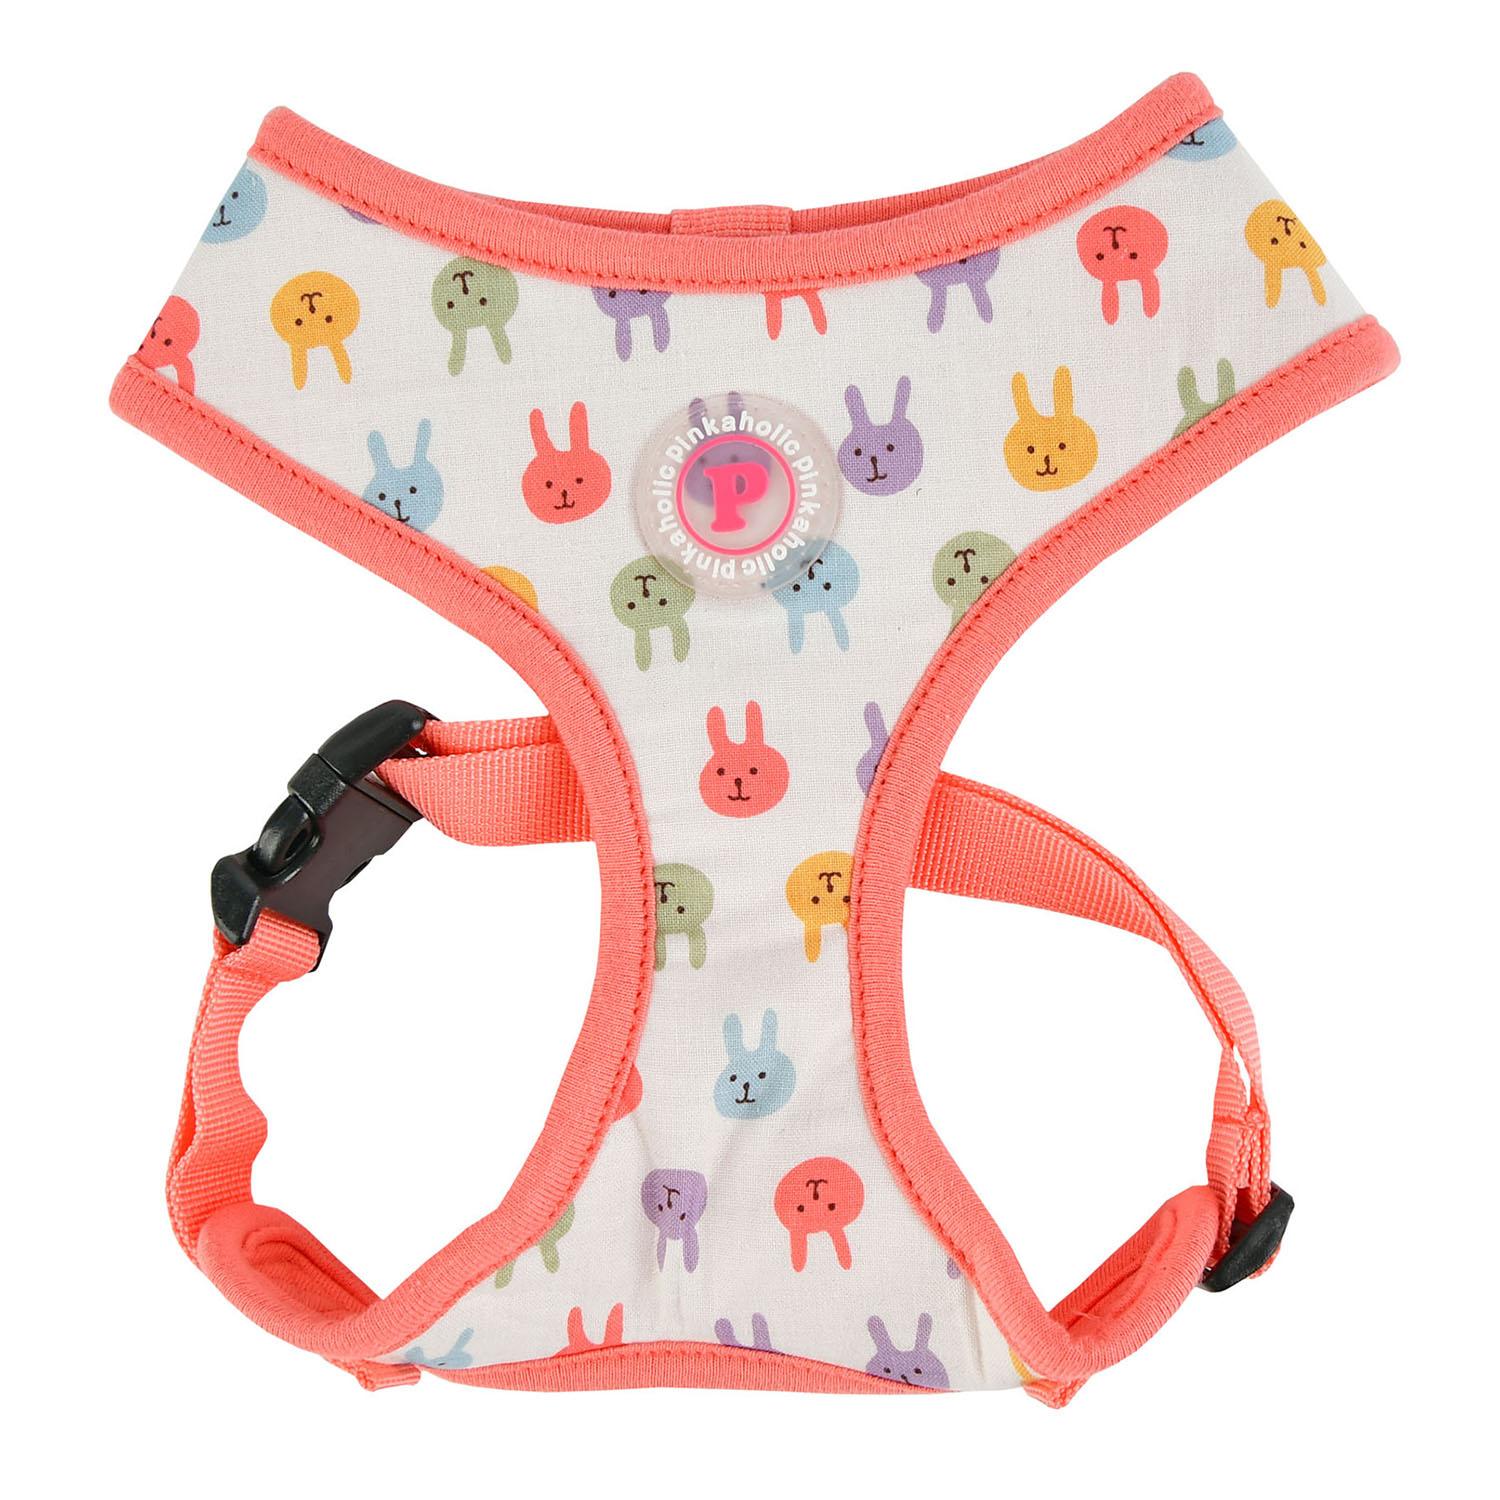 Hopper Basic Style Dog Harness by Pinkaholic - Indian Pink